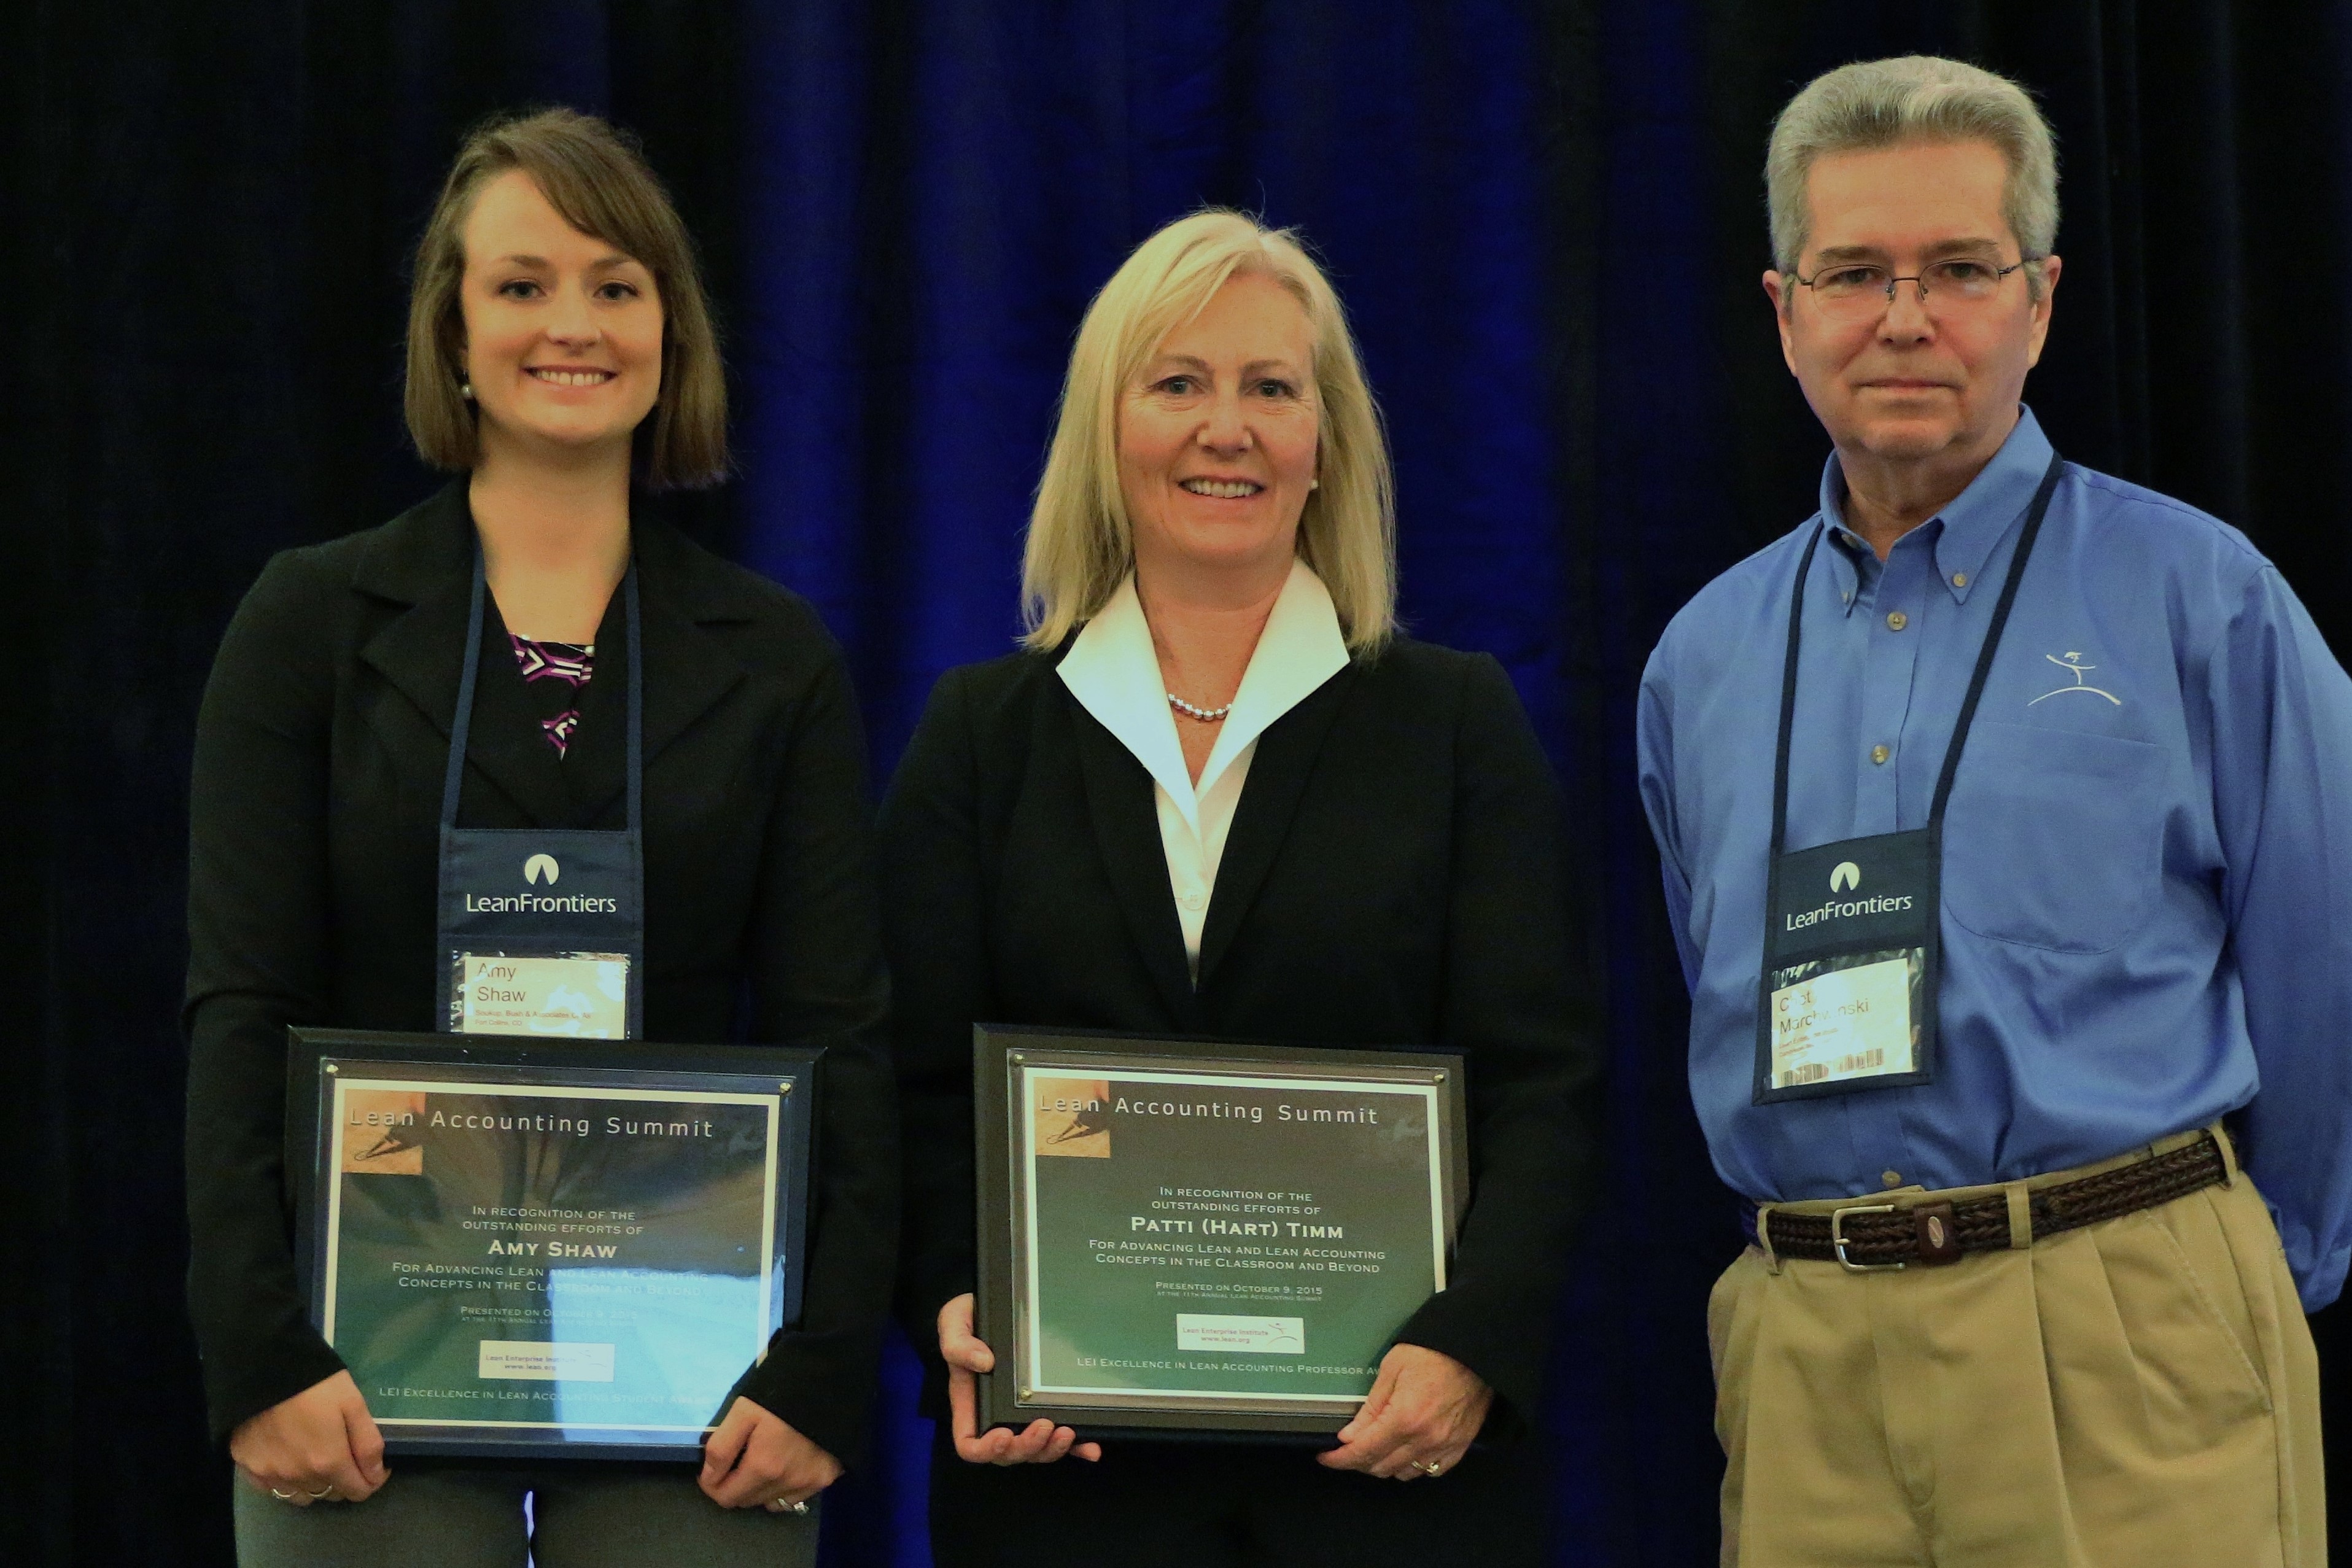 Amy Shaw, left, and Professor Patricia Hart Timm accept Excellence in Lean Accounting Awards from Chet Marchwinski, communications director, Lean Enterprise Institute.